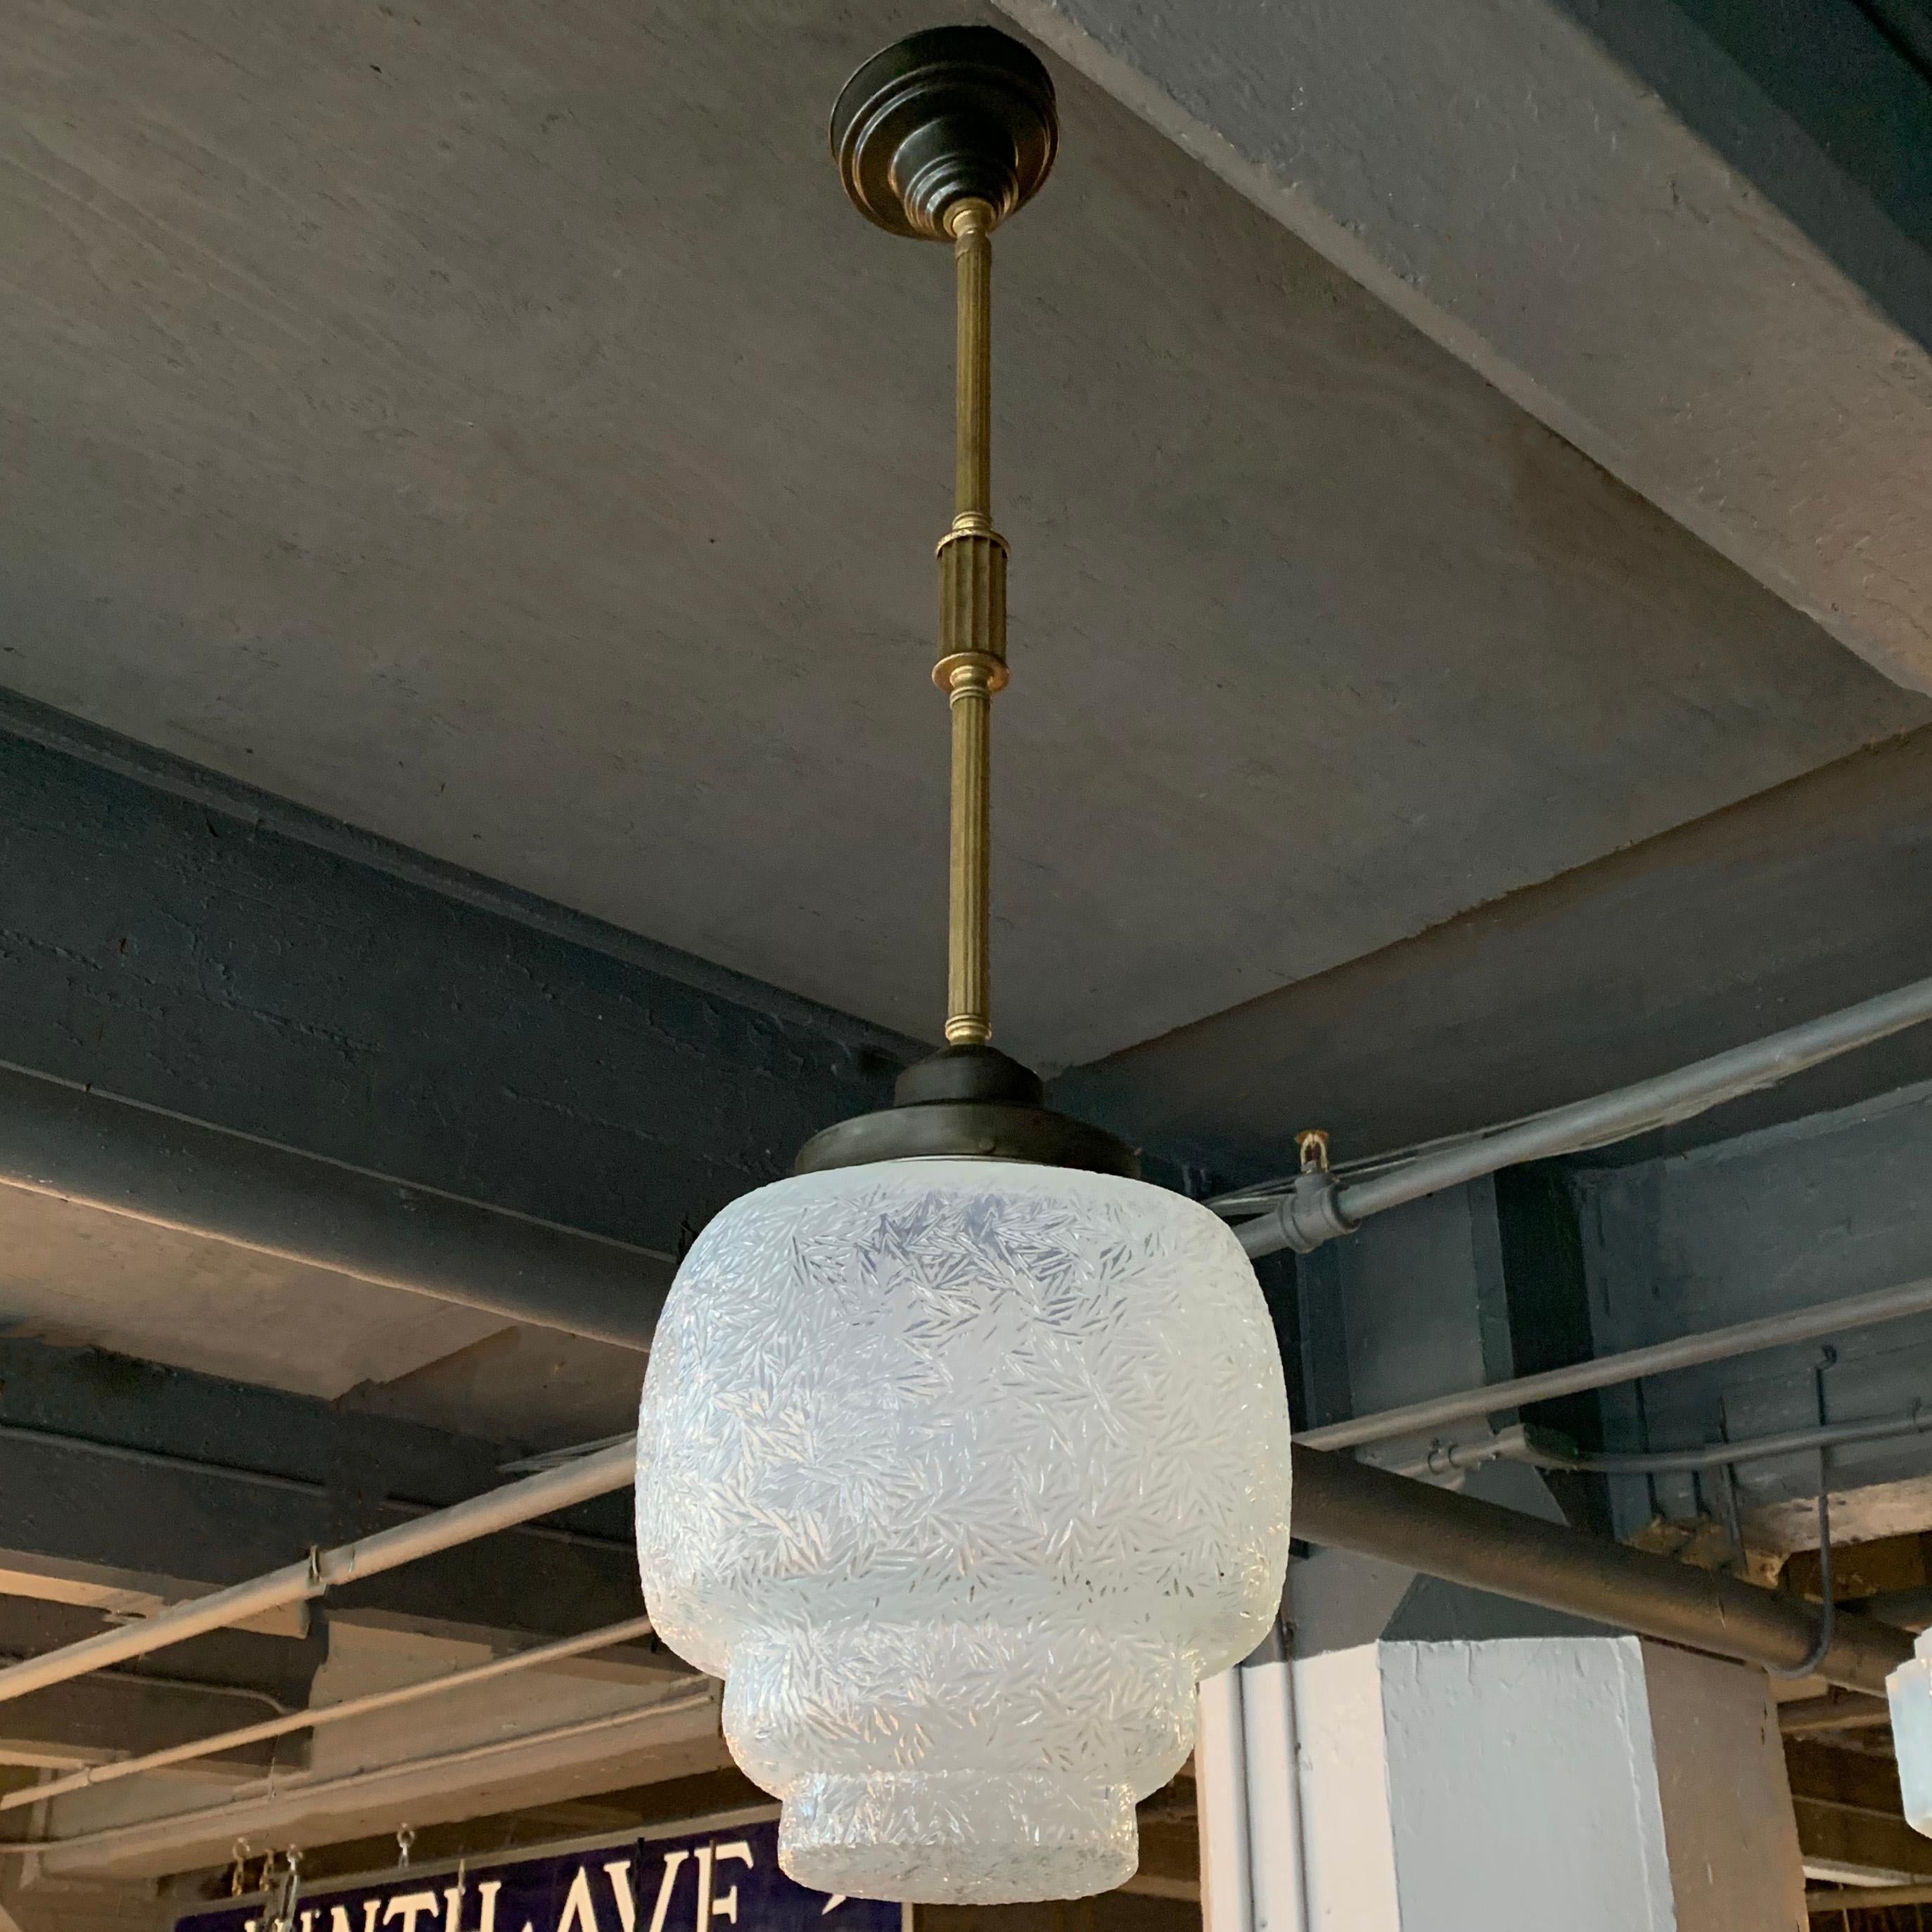 Art Deco pendant light features a layered, Frost pattern opaline glass shade on a decorative, steel and brass pole with canopy. The pendant is newly wired to accept up to a 200 watt medium socket bulb. The shade measures 9 W x 9 D x 10 Ht.